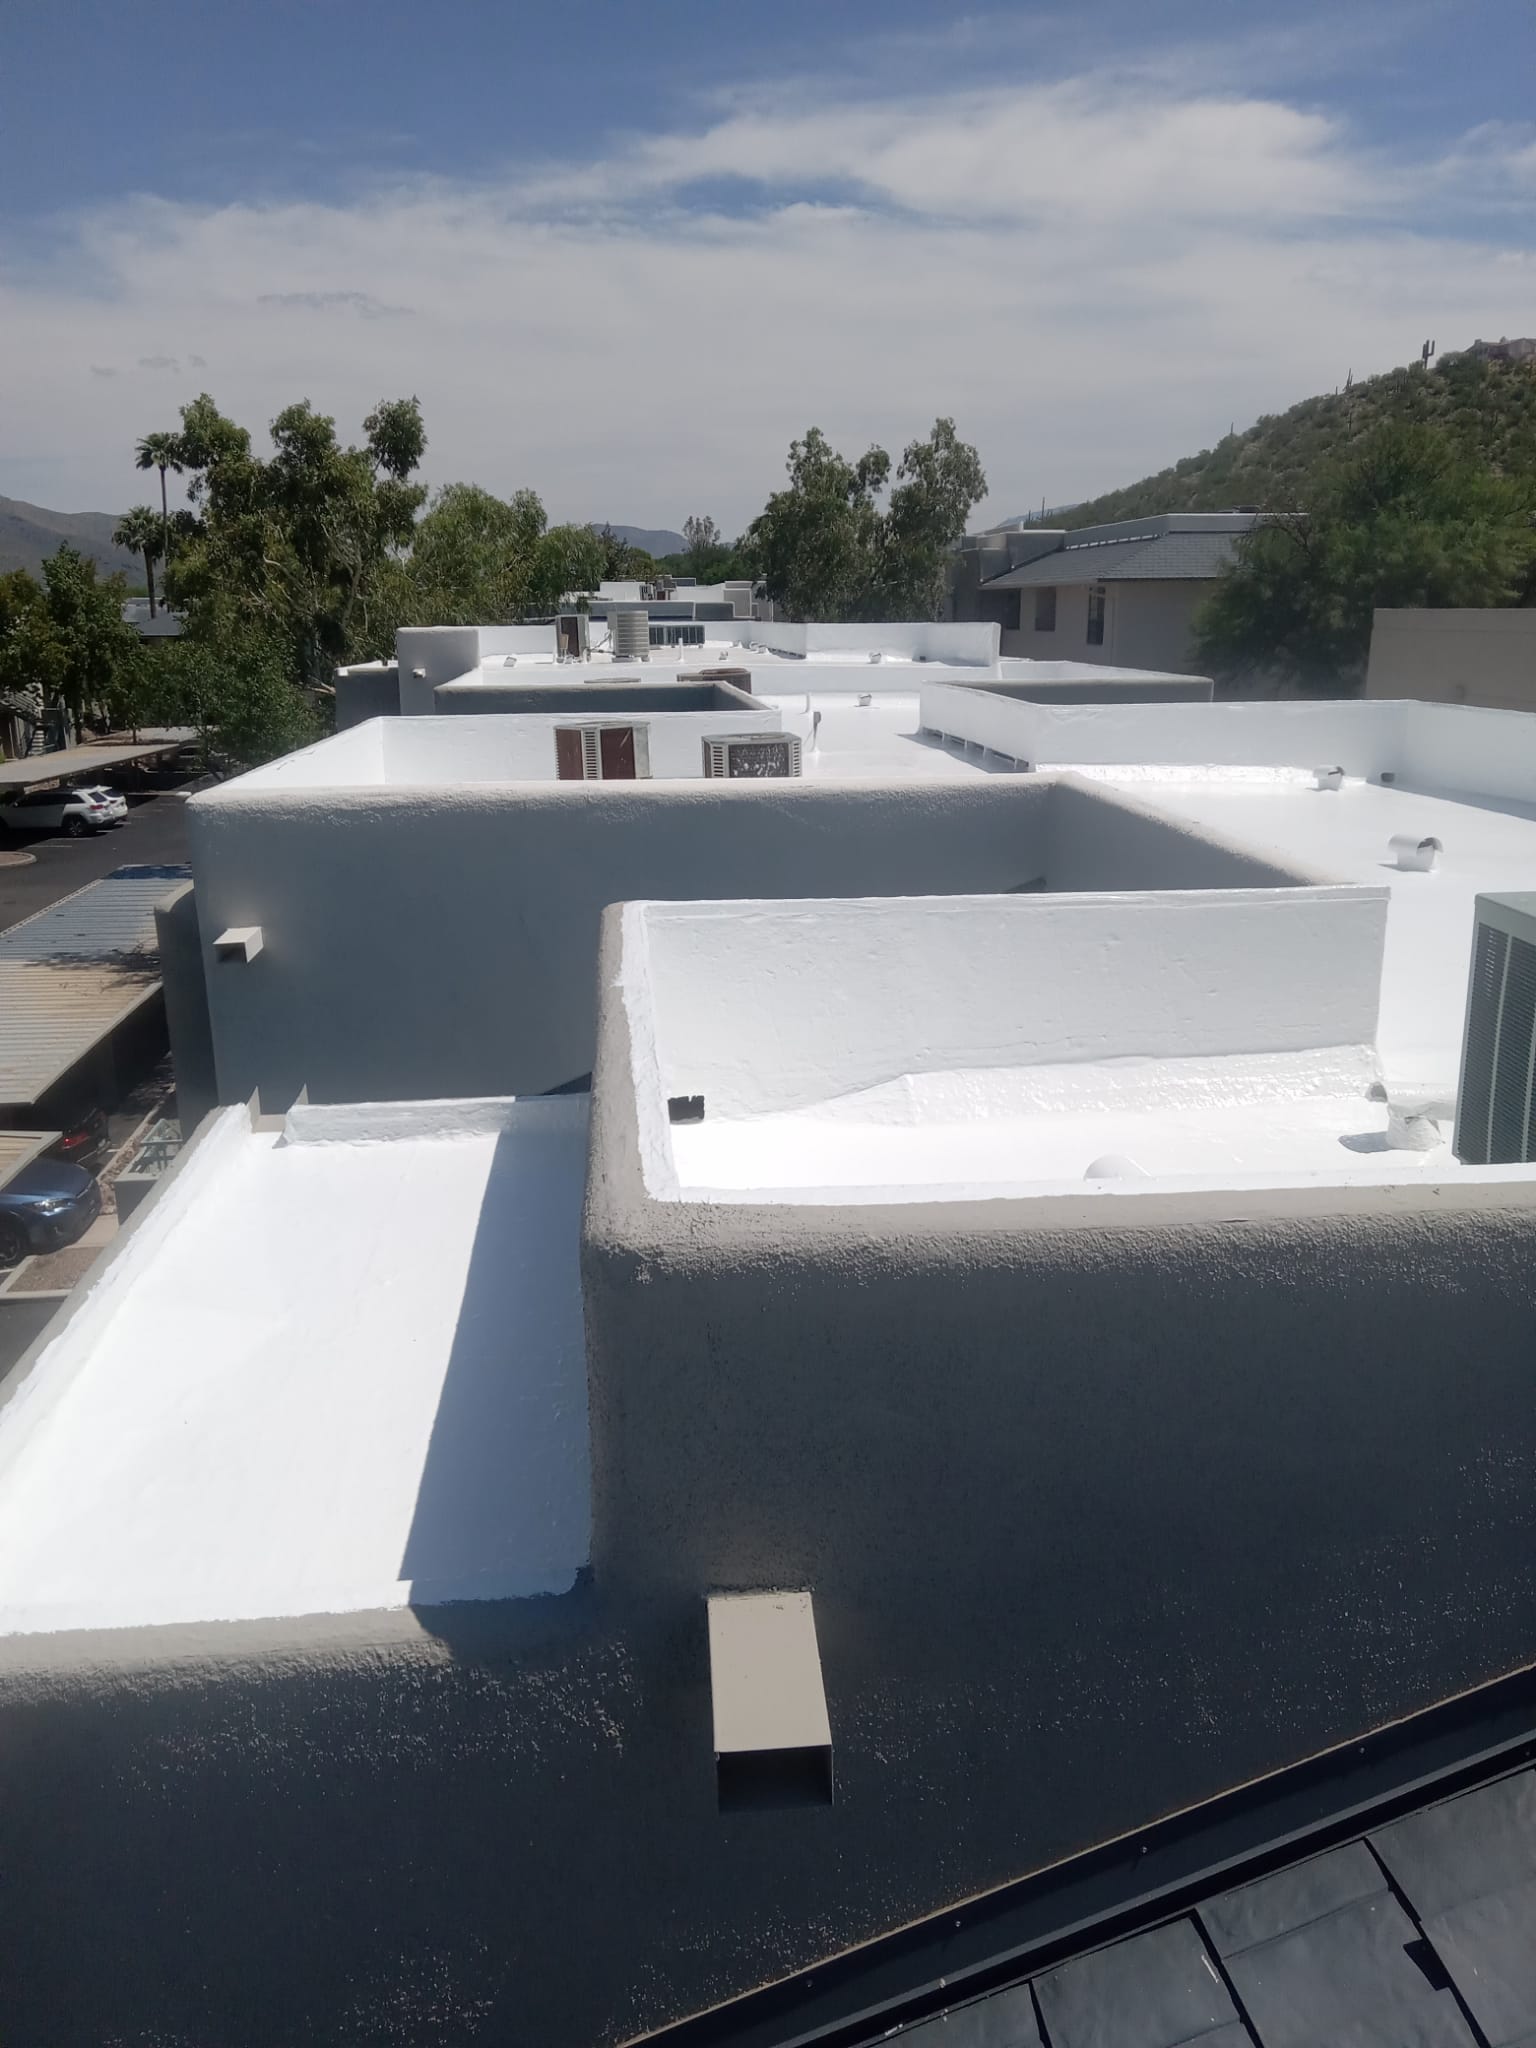 Multi-family dwelling in Paradise Valley sporting a new spray foam roof.